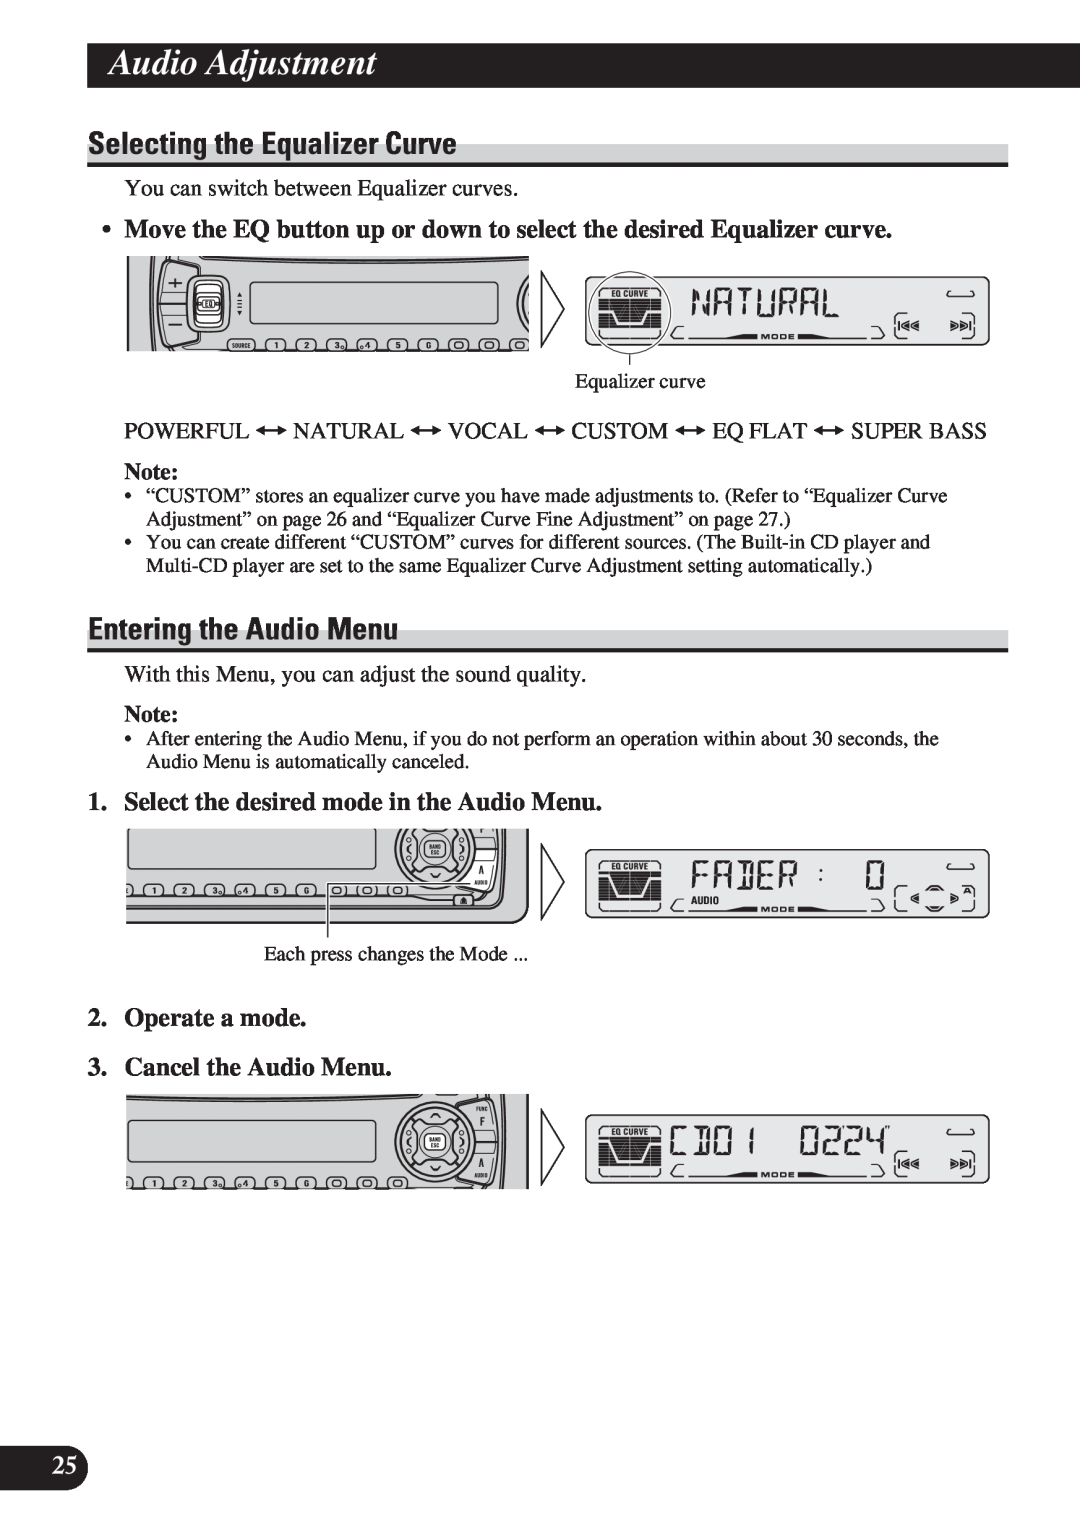 Pioneer DEH-P4150 operation manual Audio Adjustment, Selecting the Equalizer Curve, Entering the Audio Menu 